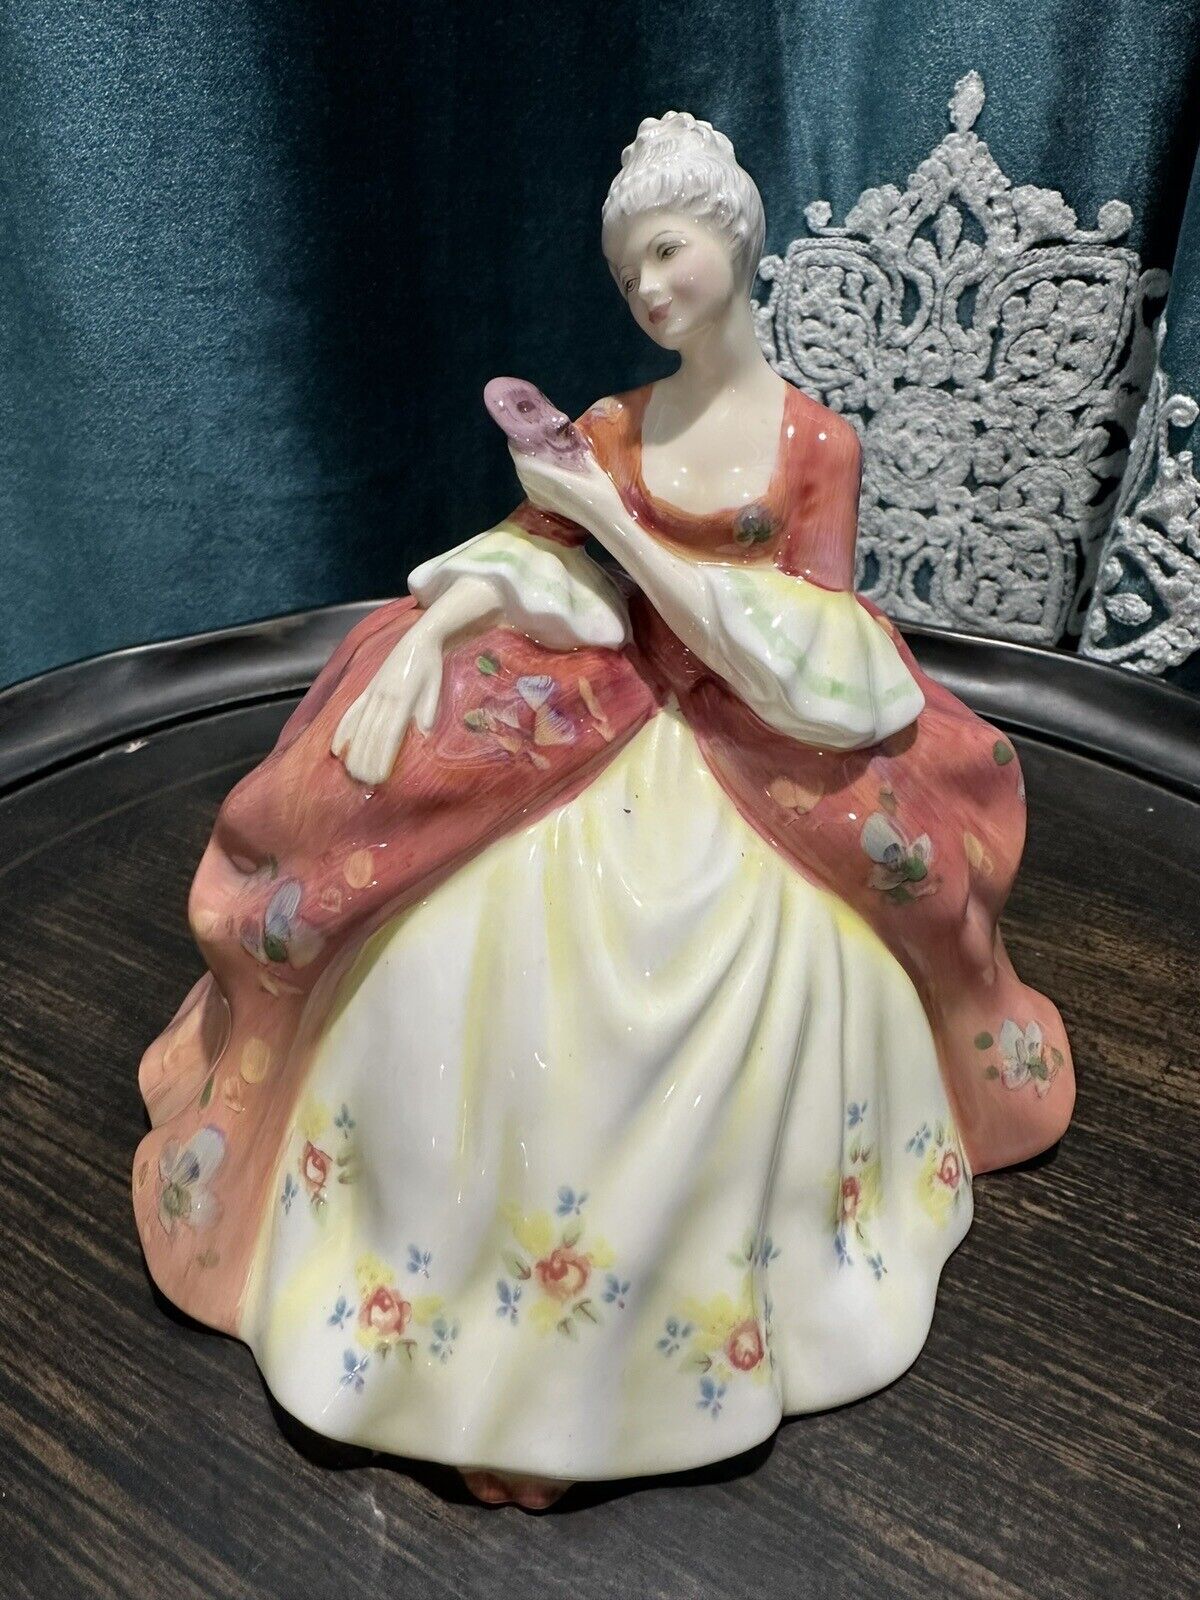 Stunning Vintage Royal Doulton Figurine, Excellent Condition